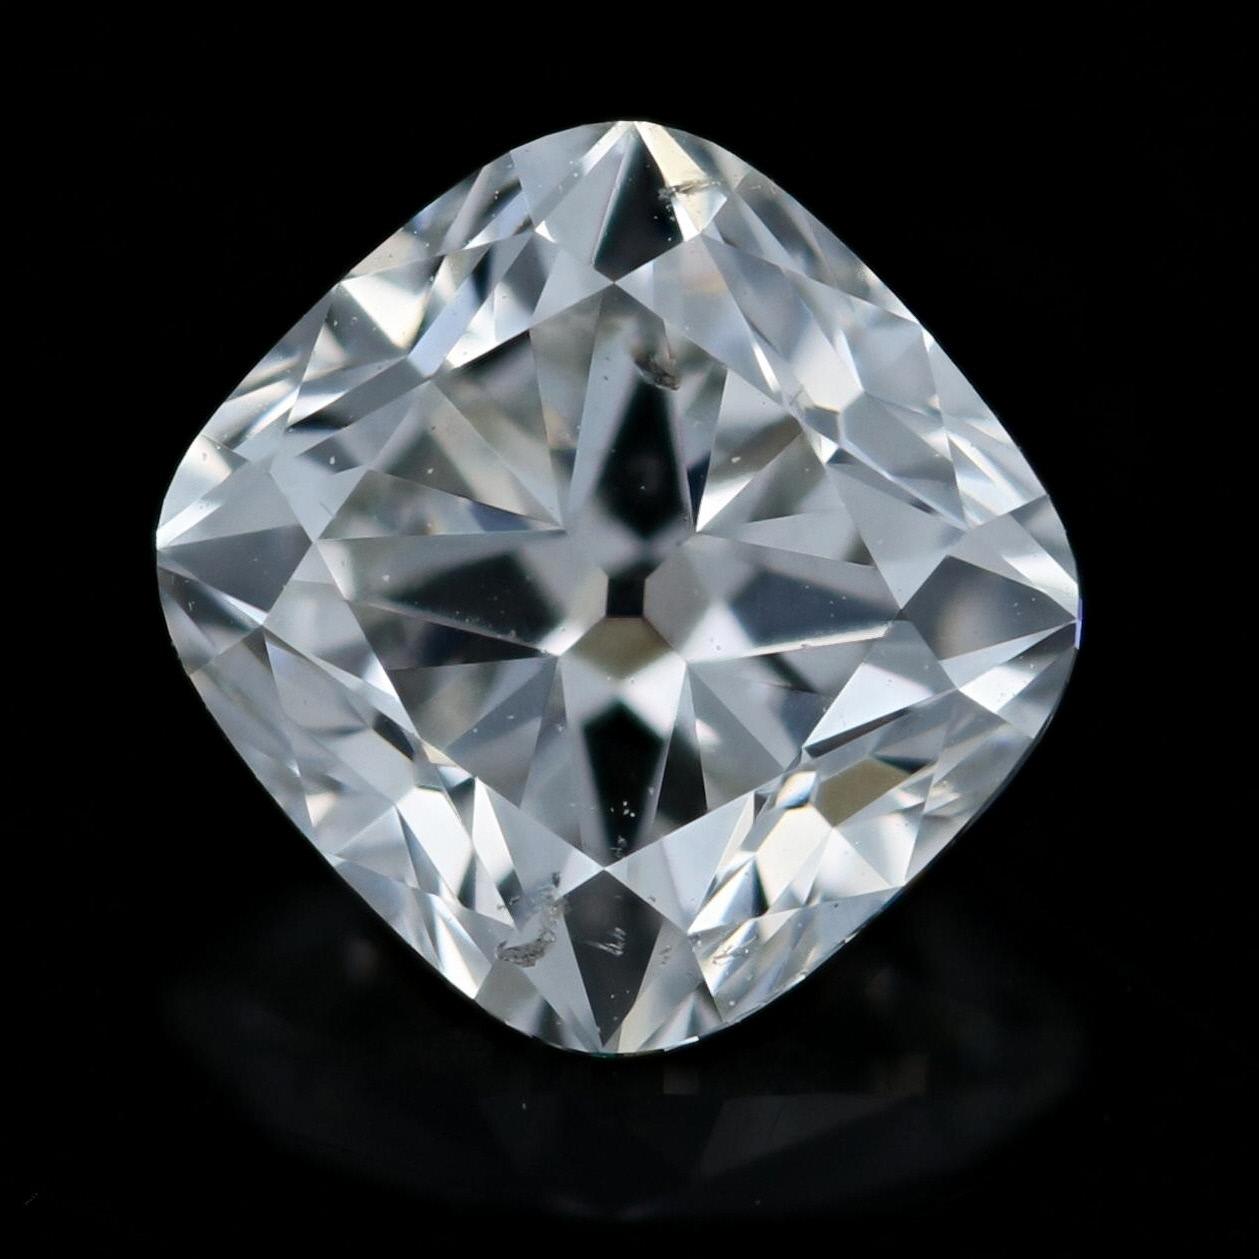 Weight: .91ct
Cut: Cushion 
Color: H   
Clarity: SI2 
Dimensions (mm): 5.62 x 5.42 x 3.75 

GIA Report Number: 6107507189 

Condition: New  

Please check out the enlarged pictures.

Thank you for taking the time to read our description. If you have